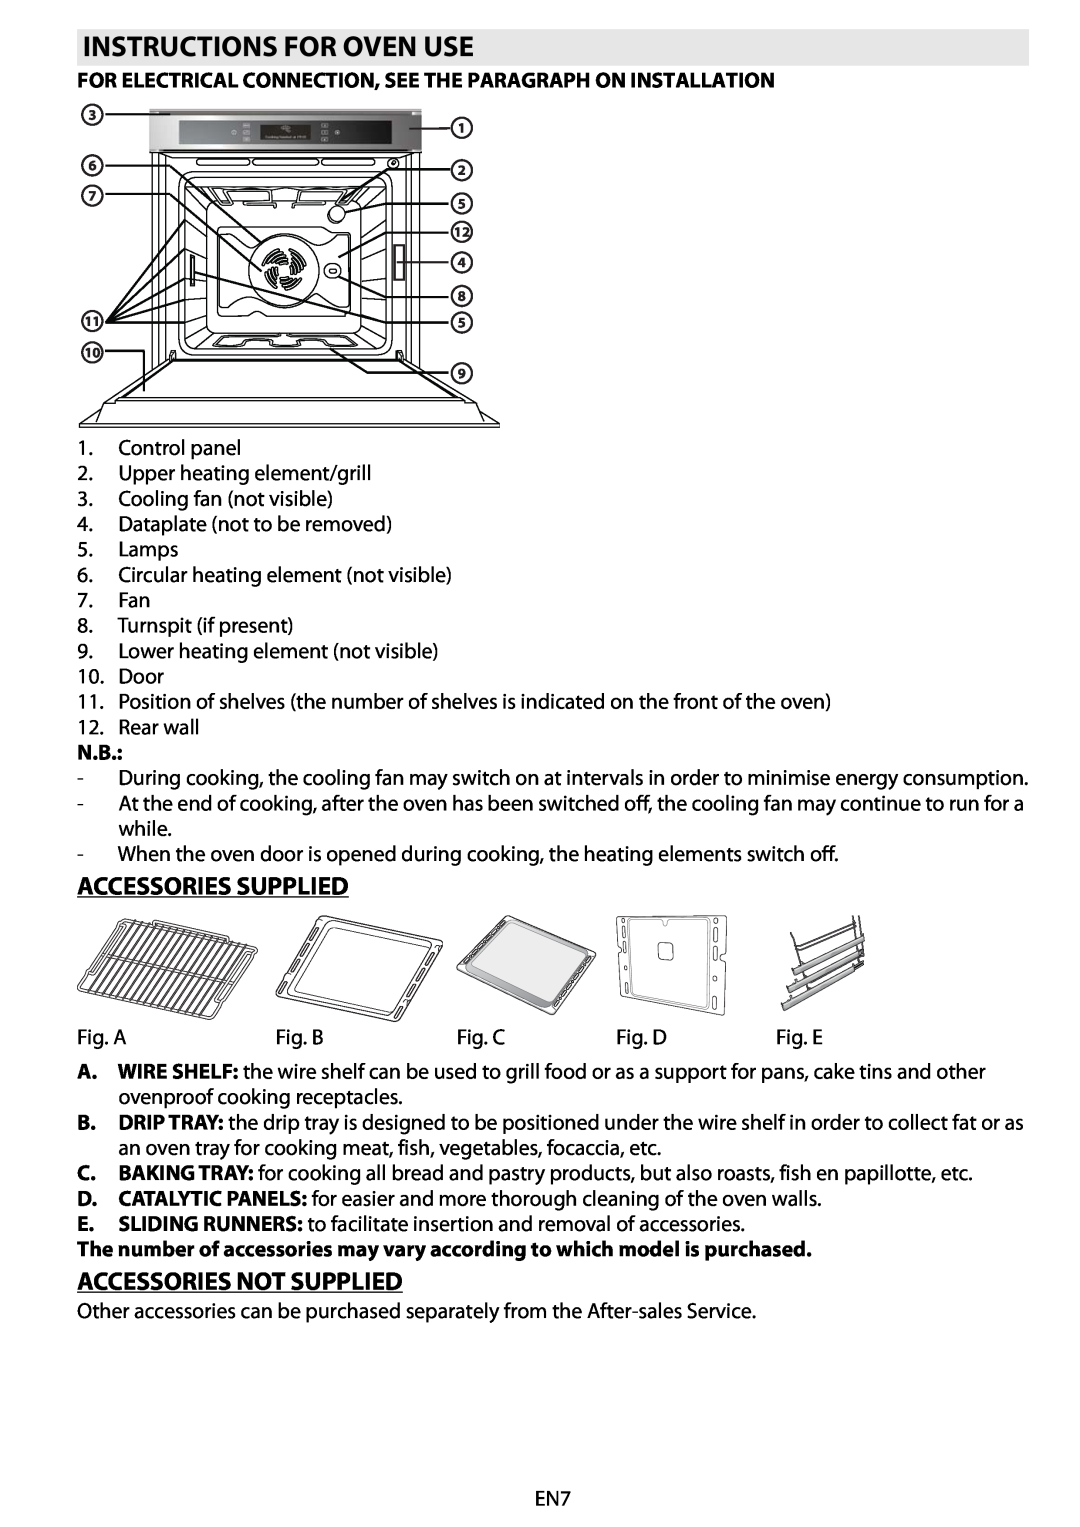 Whirlpool AKZM 663 manual Instructions For Oven Use, Accessories Supplied, Accessories Not Supplied 